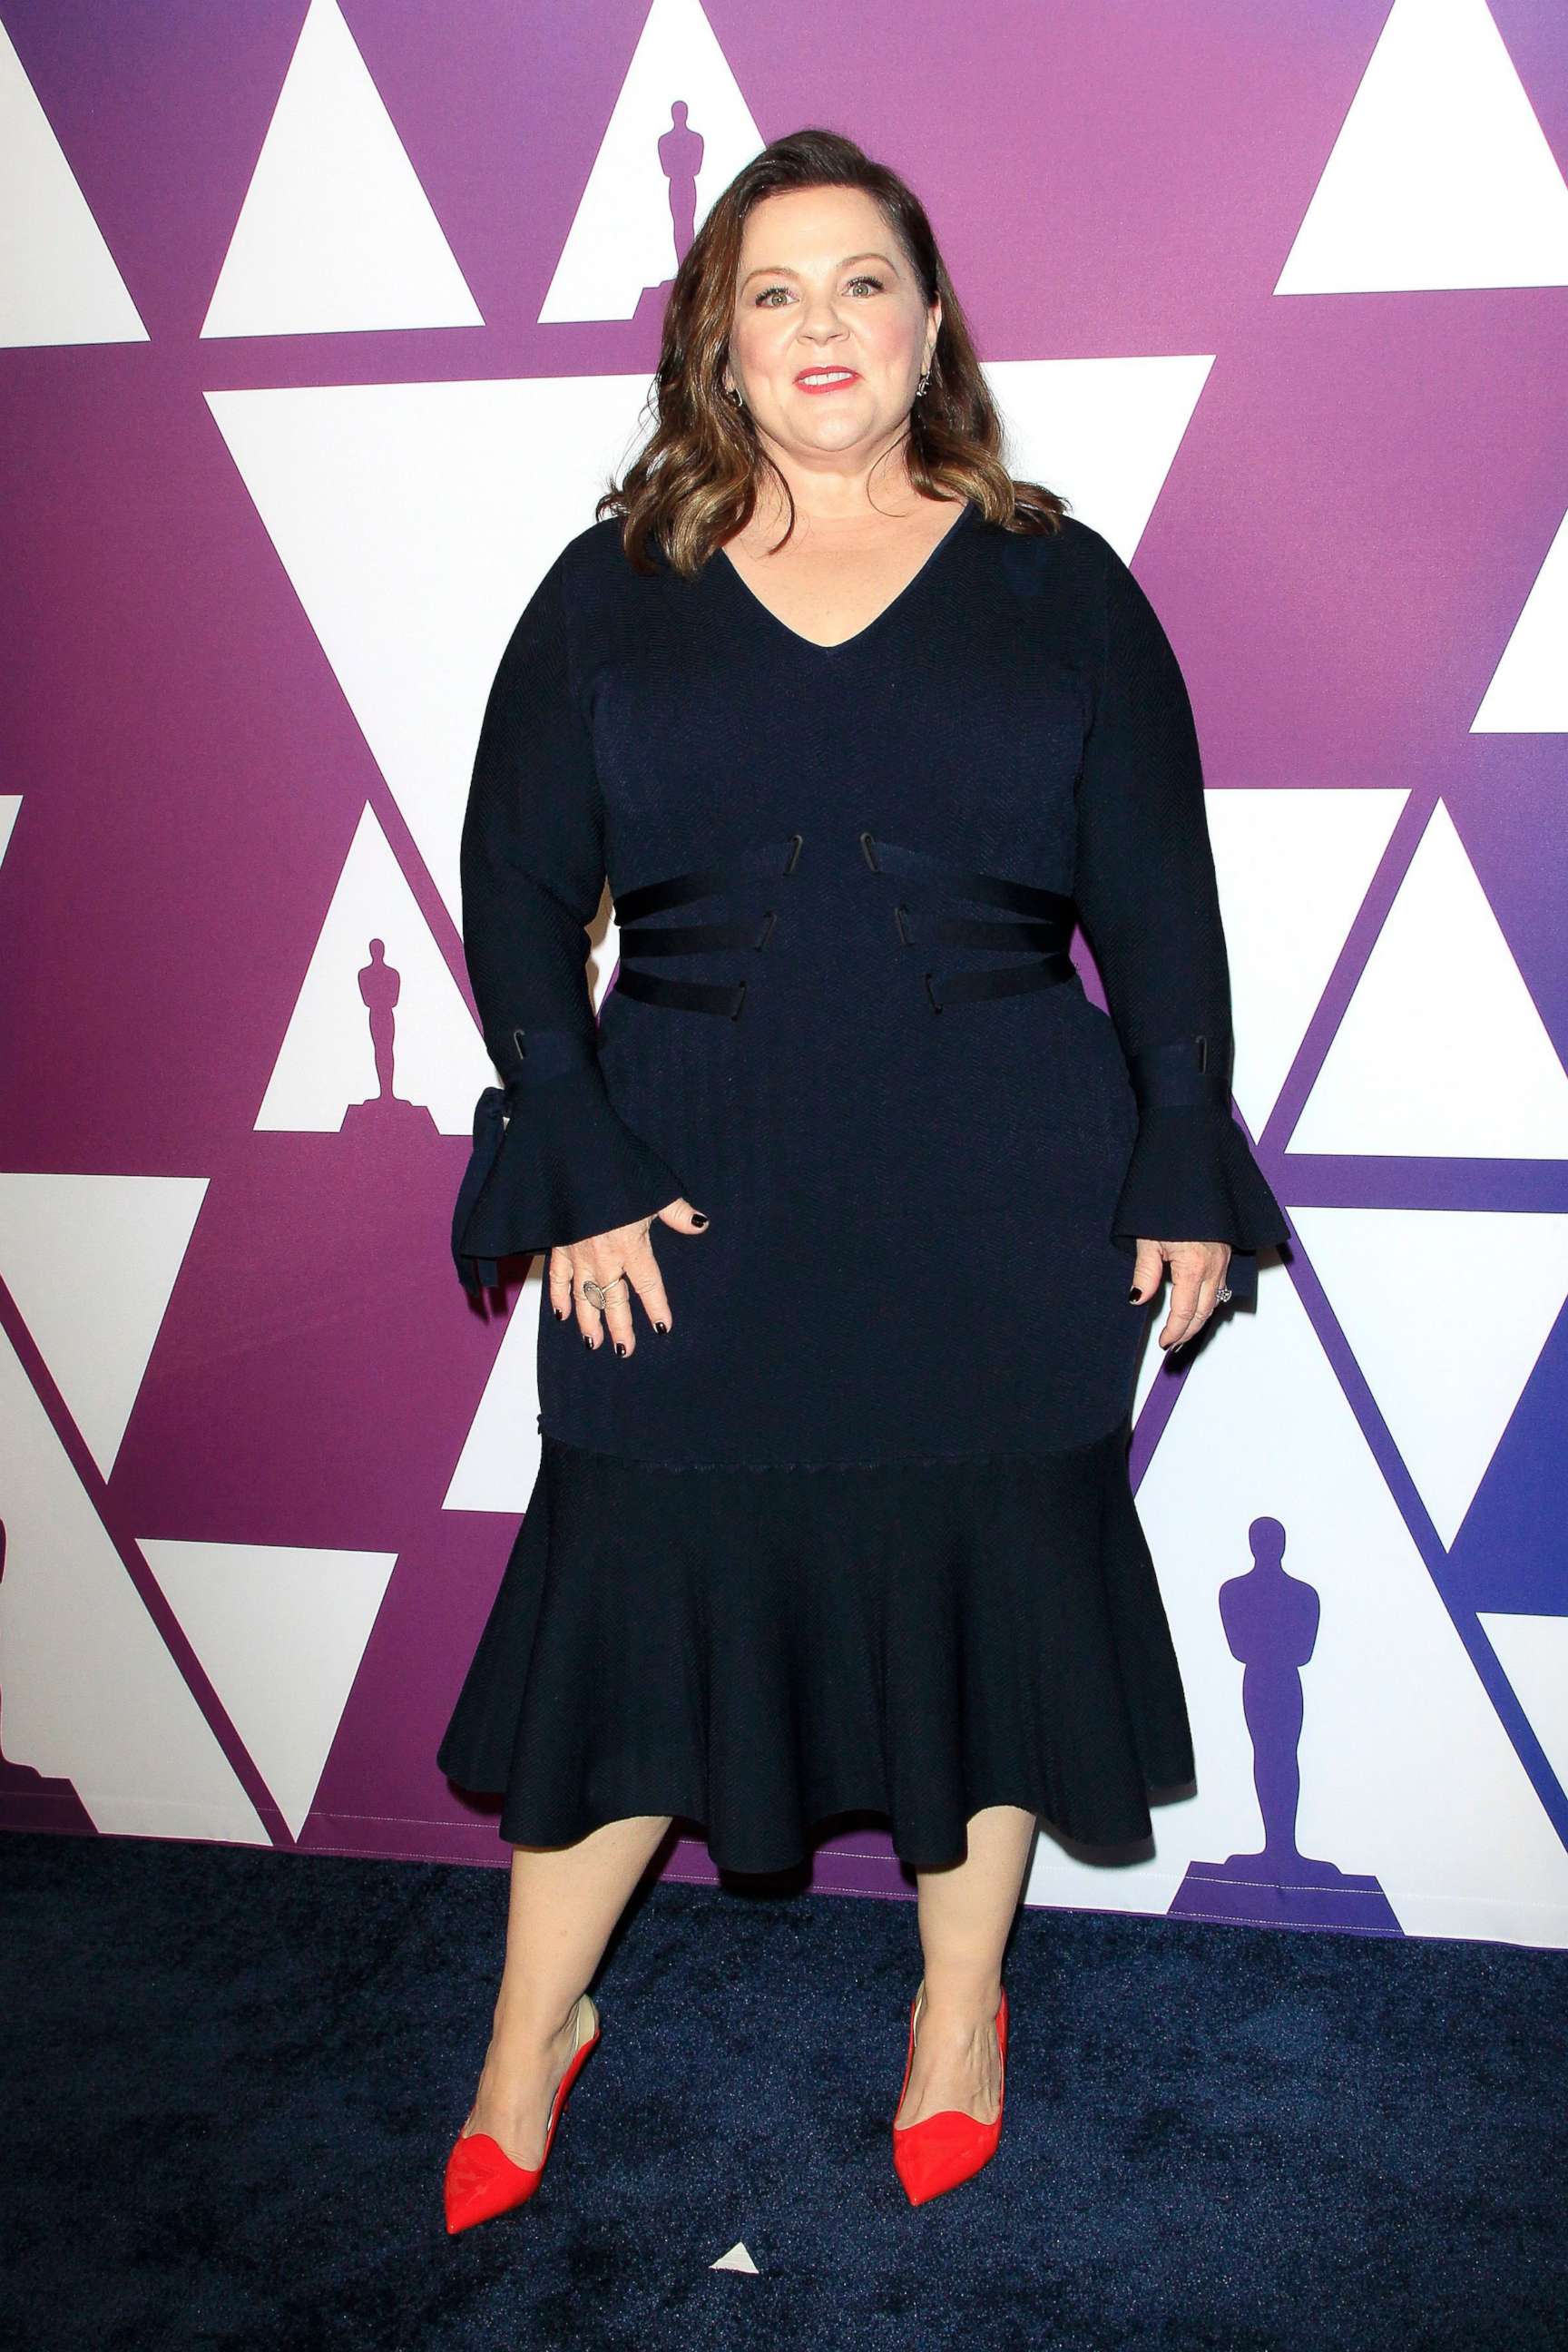 PHOTO: Melissa McCarthy arrives for the 91st Oscars Nominees Luncheon at The Beverly Hilton Hotel in Beverly Hills, Calif., Feb. 4, 2019.